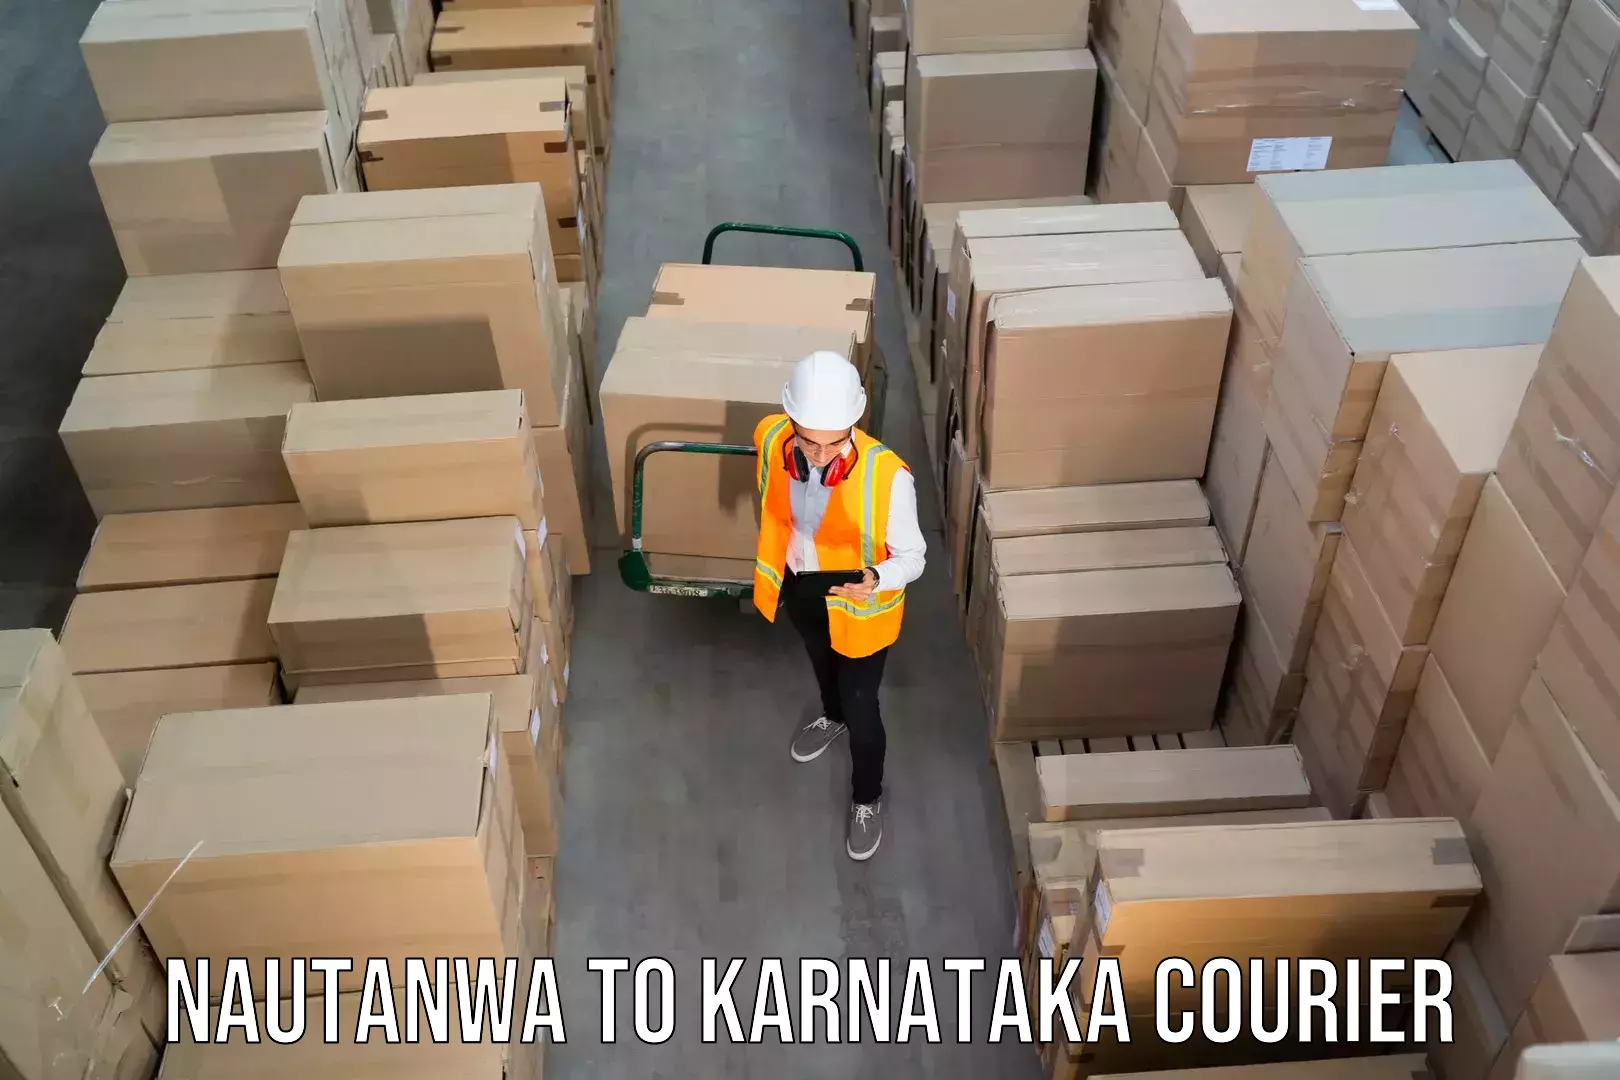 Customer-oriented courier services Nautanwa to Mangalore Port